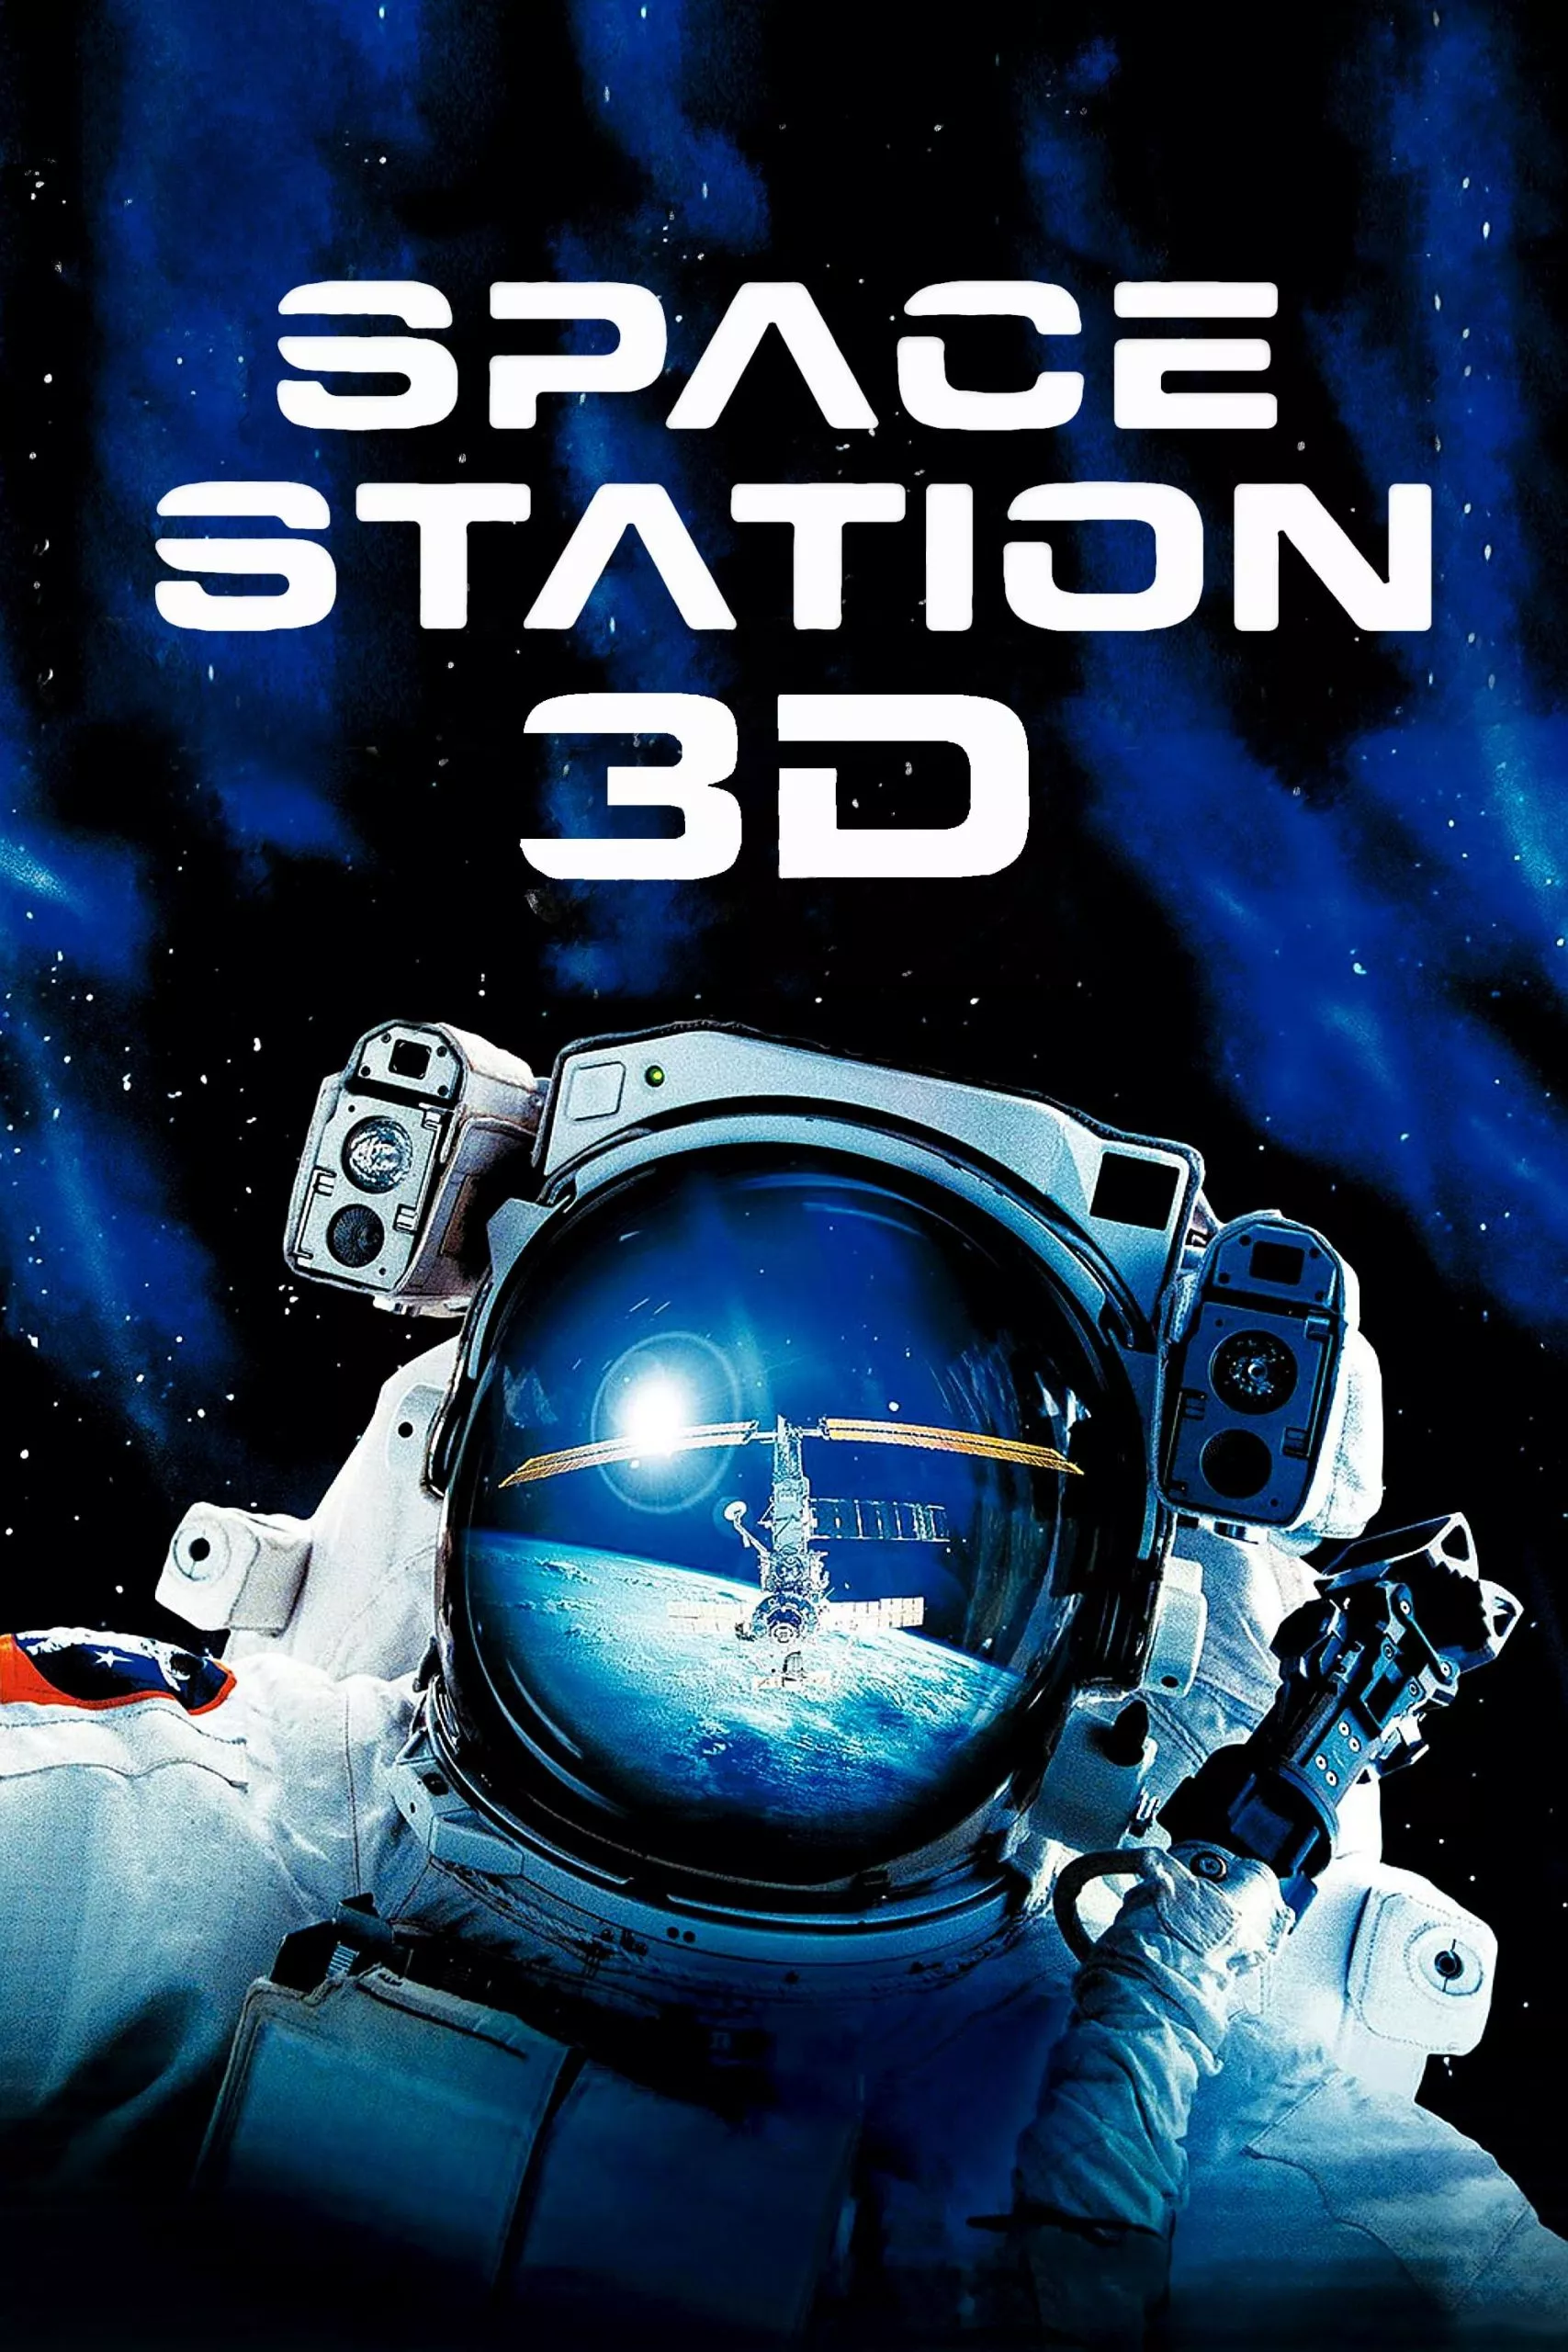 IMAX Space Station: Adventures in Space (2002)